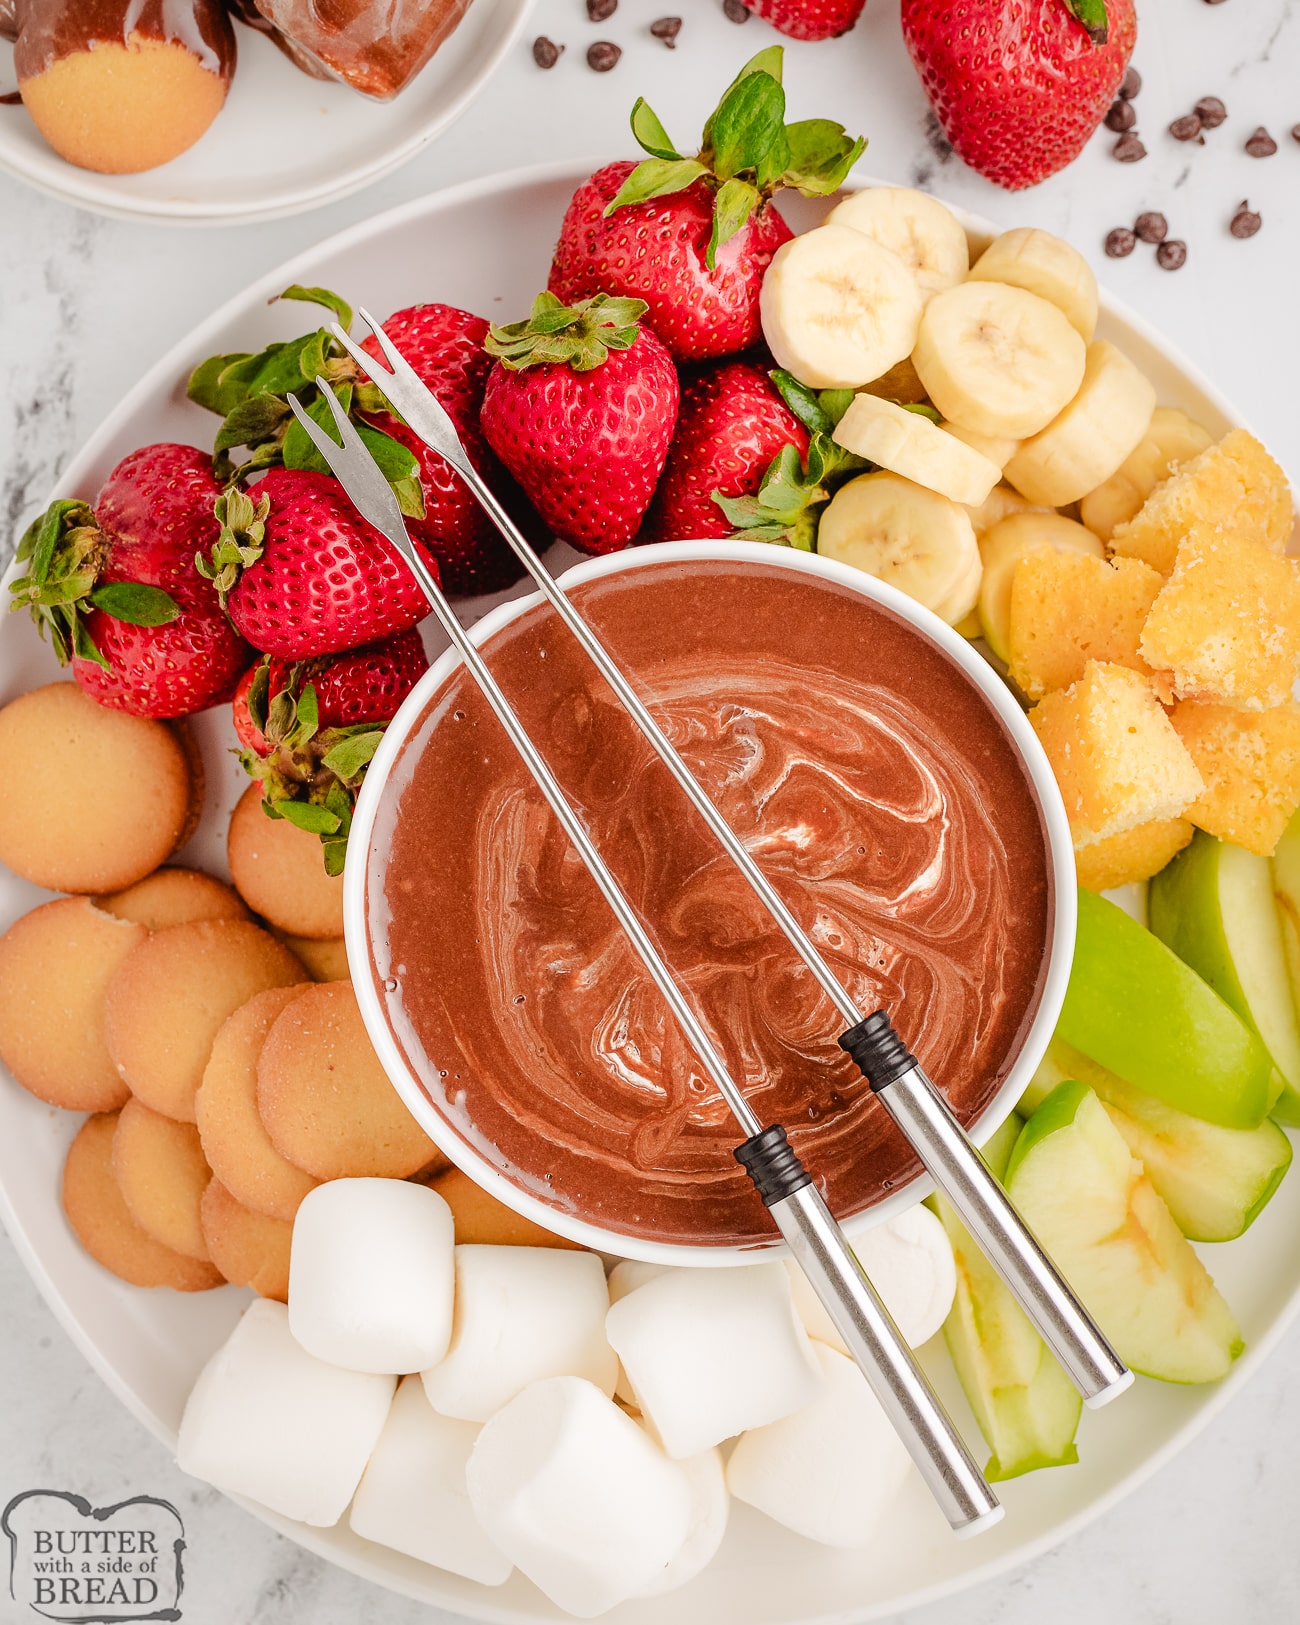 tray with marshmallow fondue and fruits for dipping